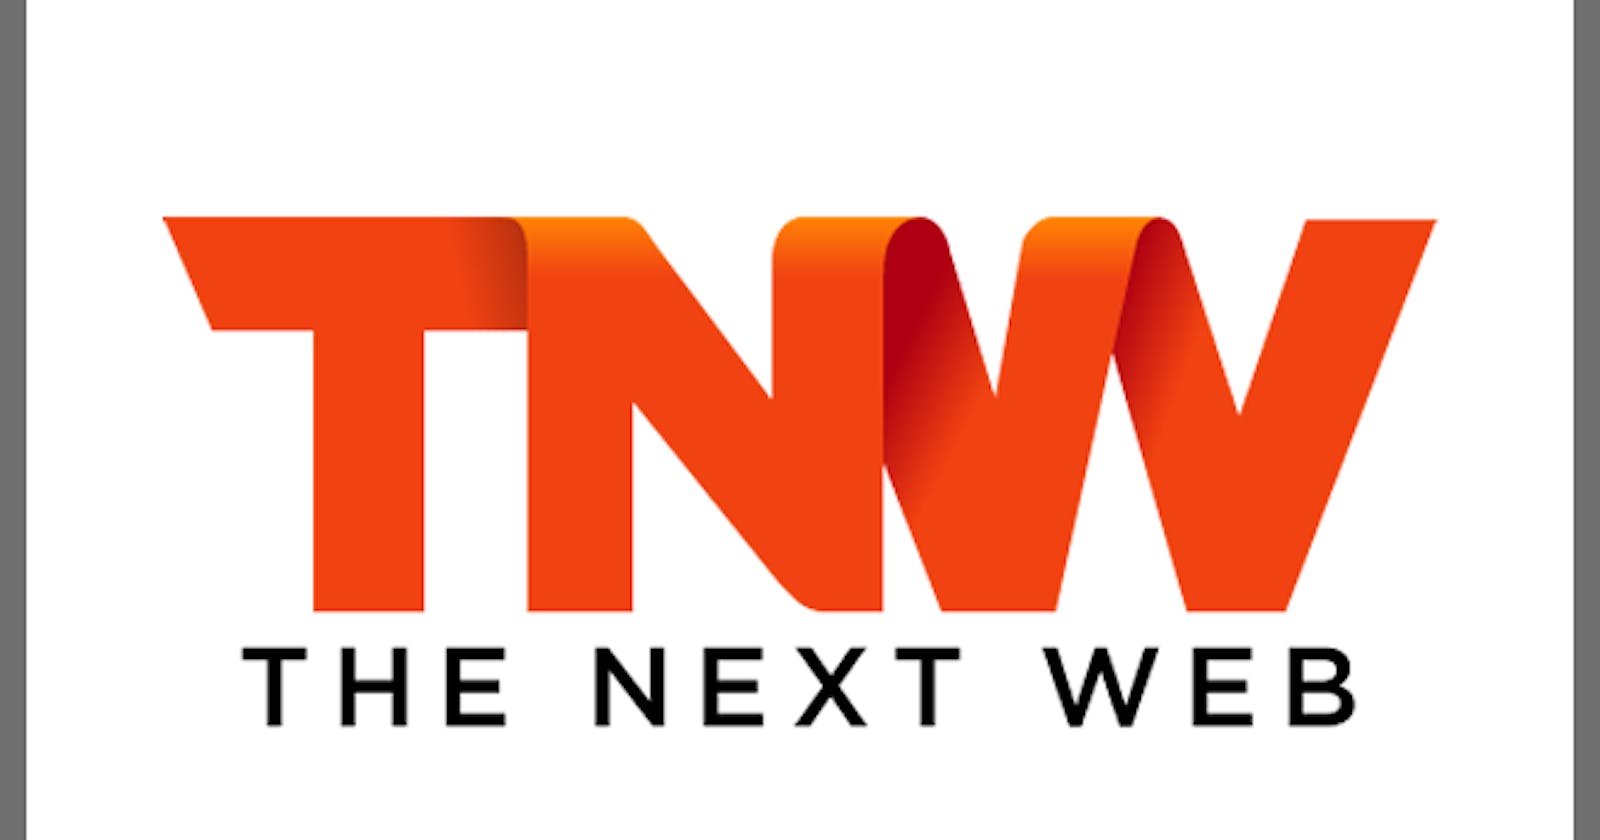 The Next Web: A Leading Source of Technology News and Analysis